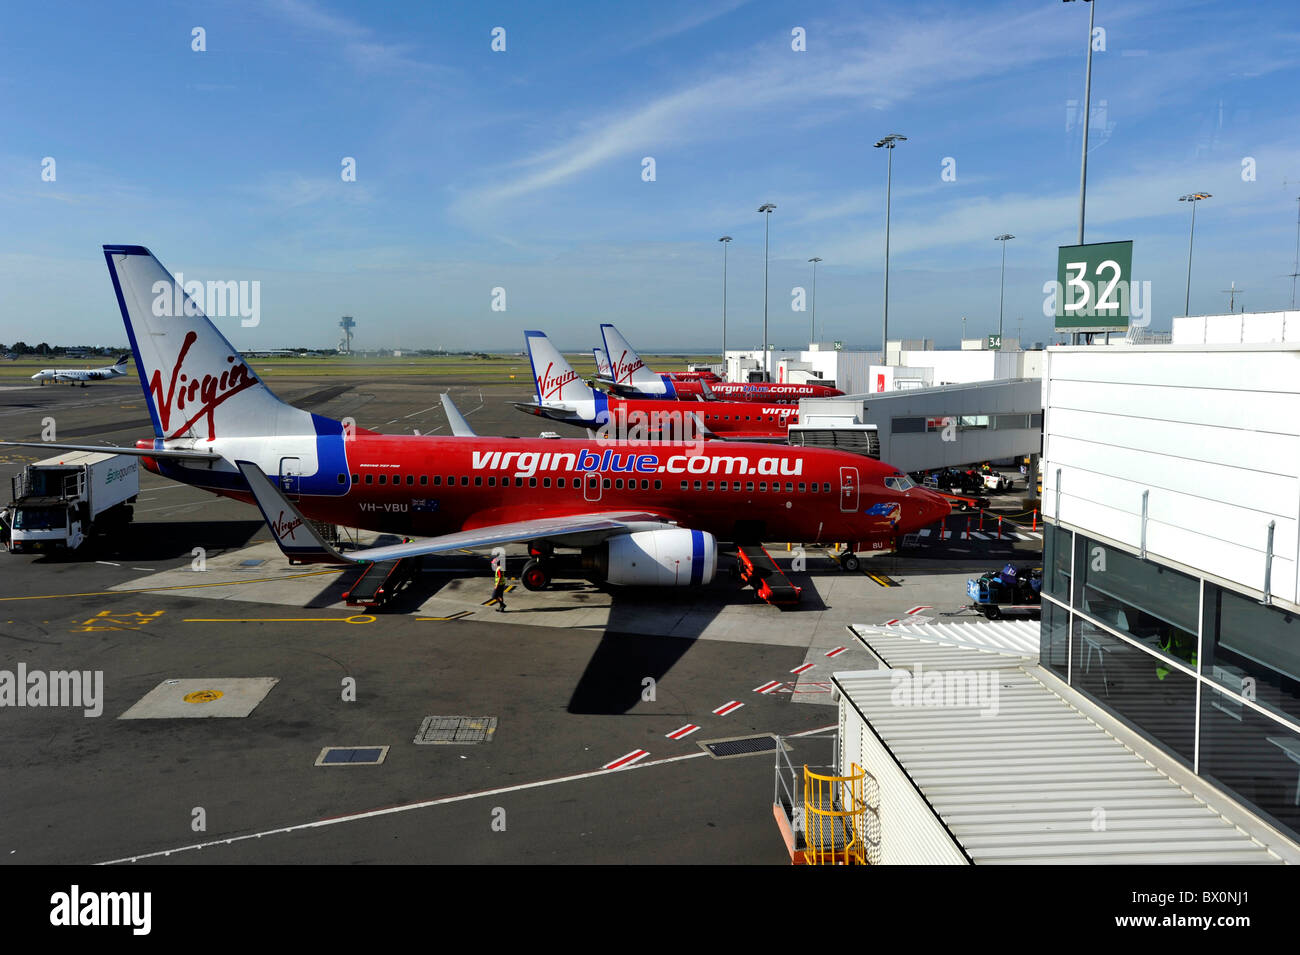 Sydney Airport Domestic terminal and Virgin Aircraft Stock Photo